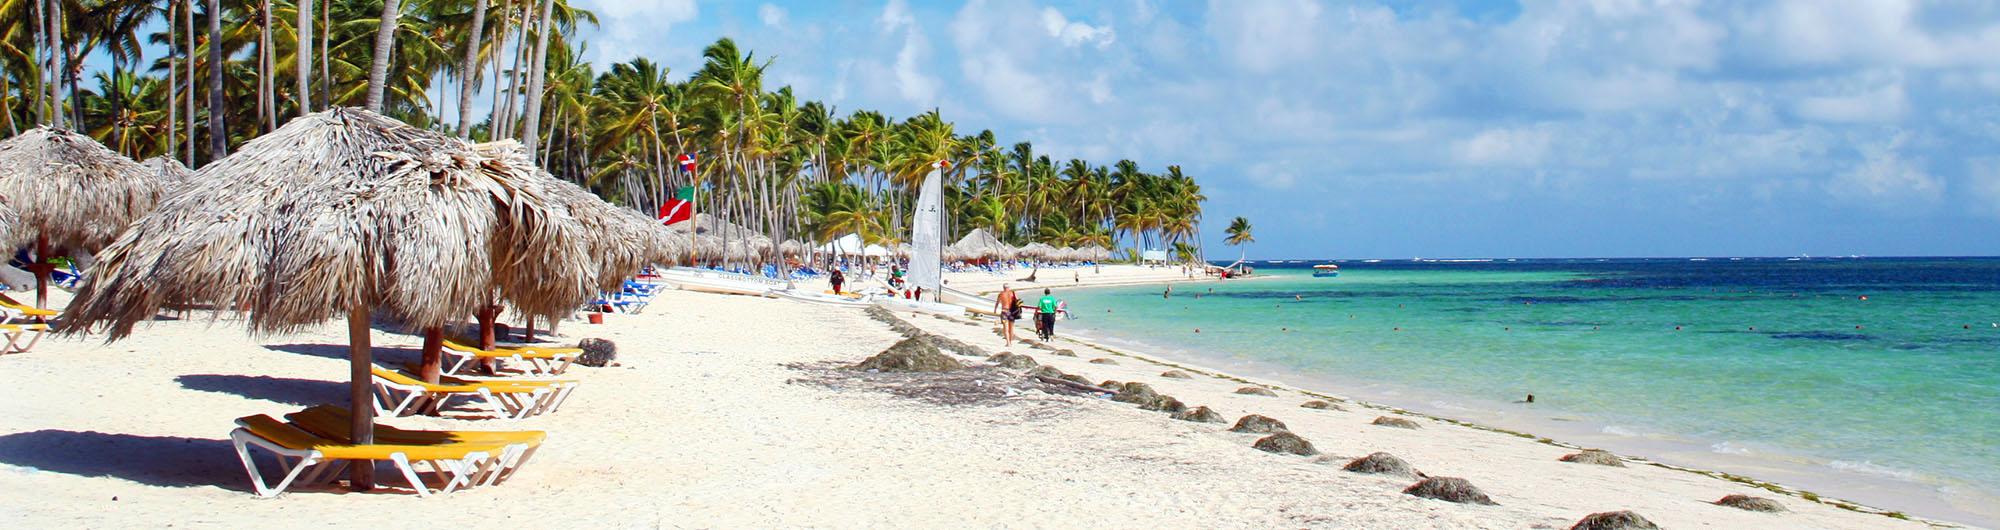 Search and compare cheap flights from Saint Croix to Punta Cana